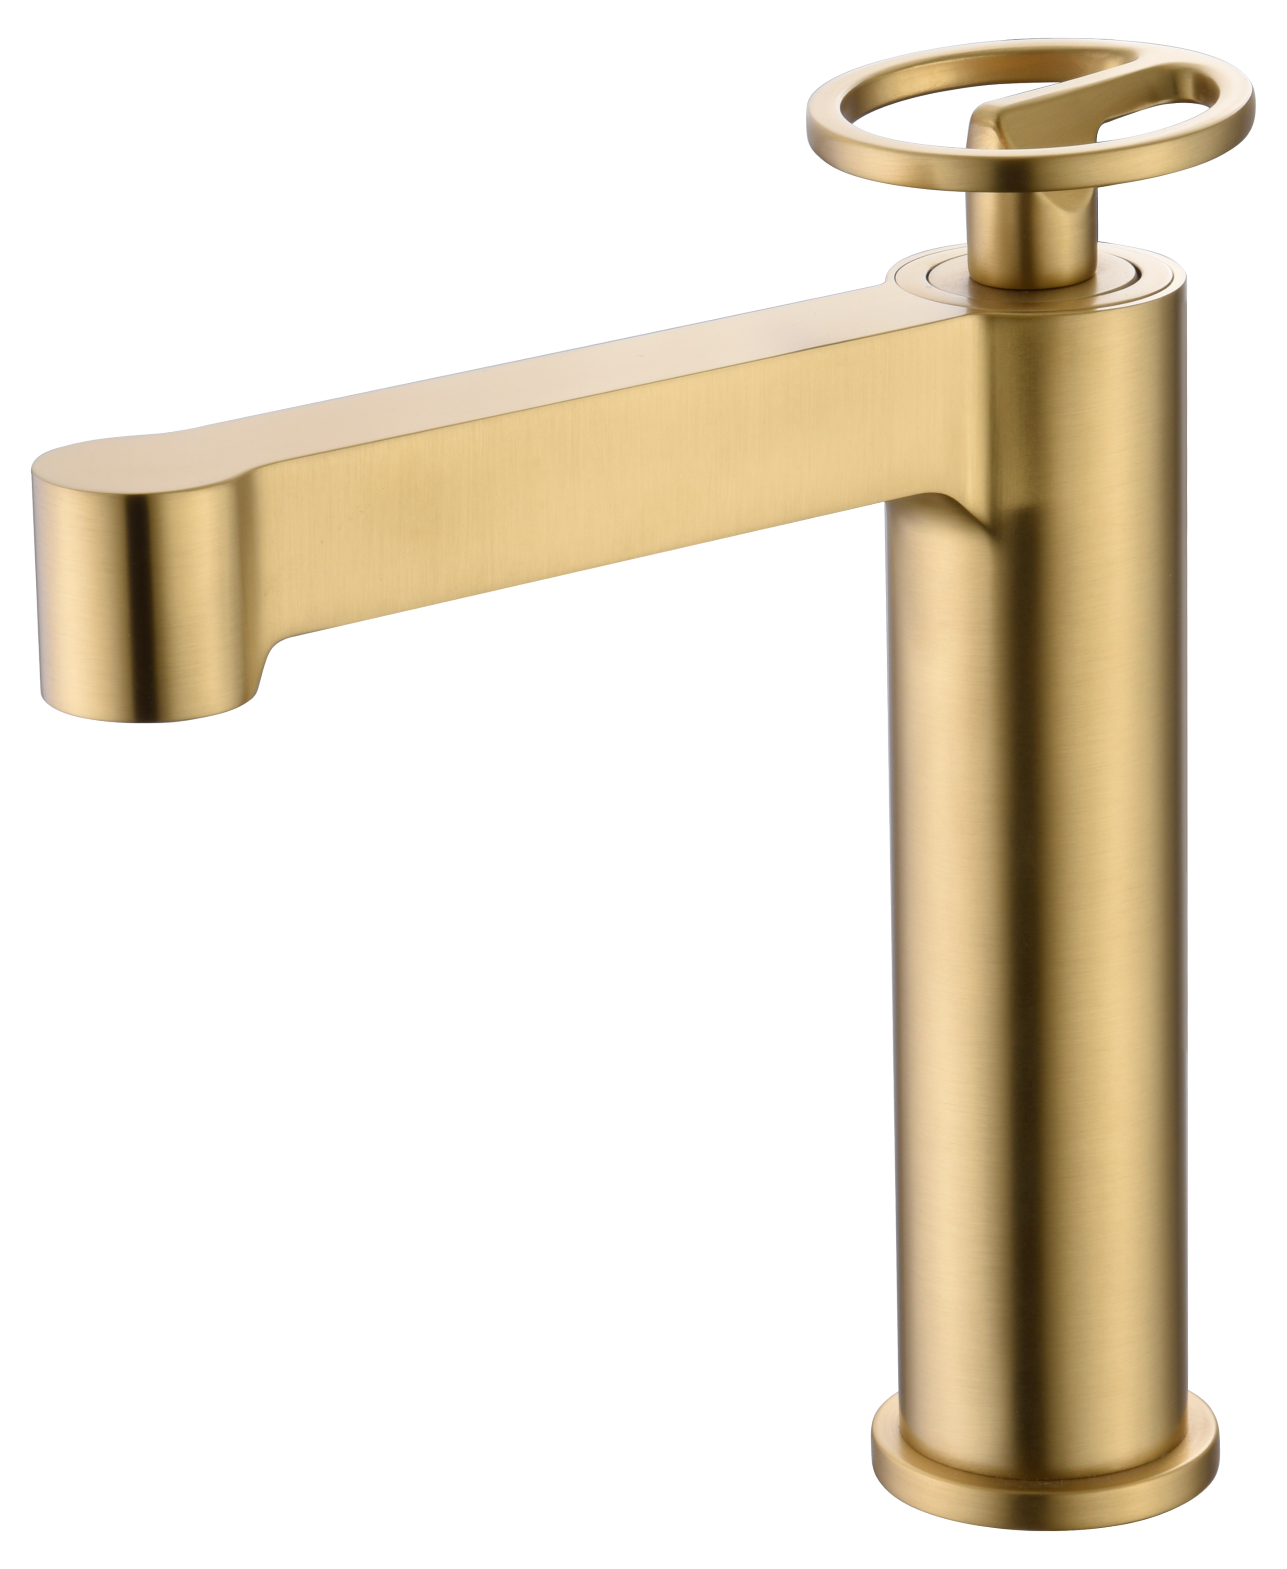 Olimpo high brushed gold washbasin mixer taps by Imex 